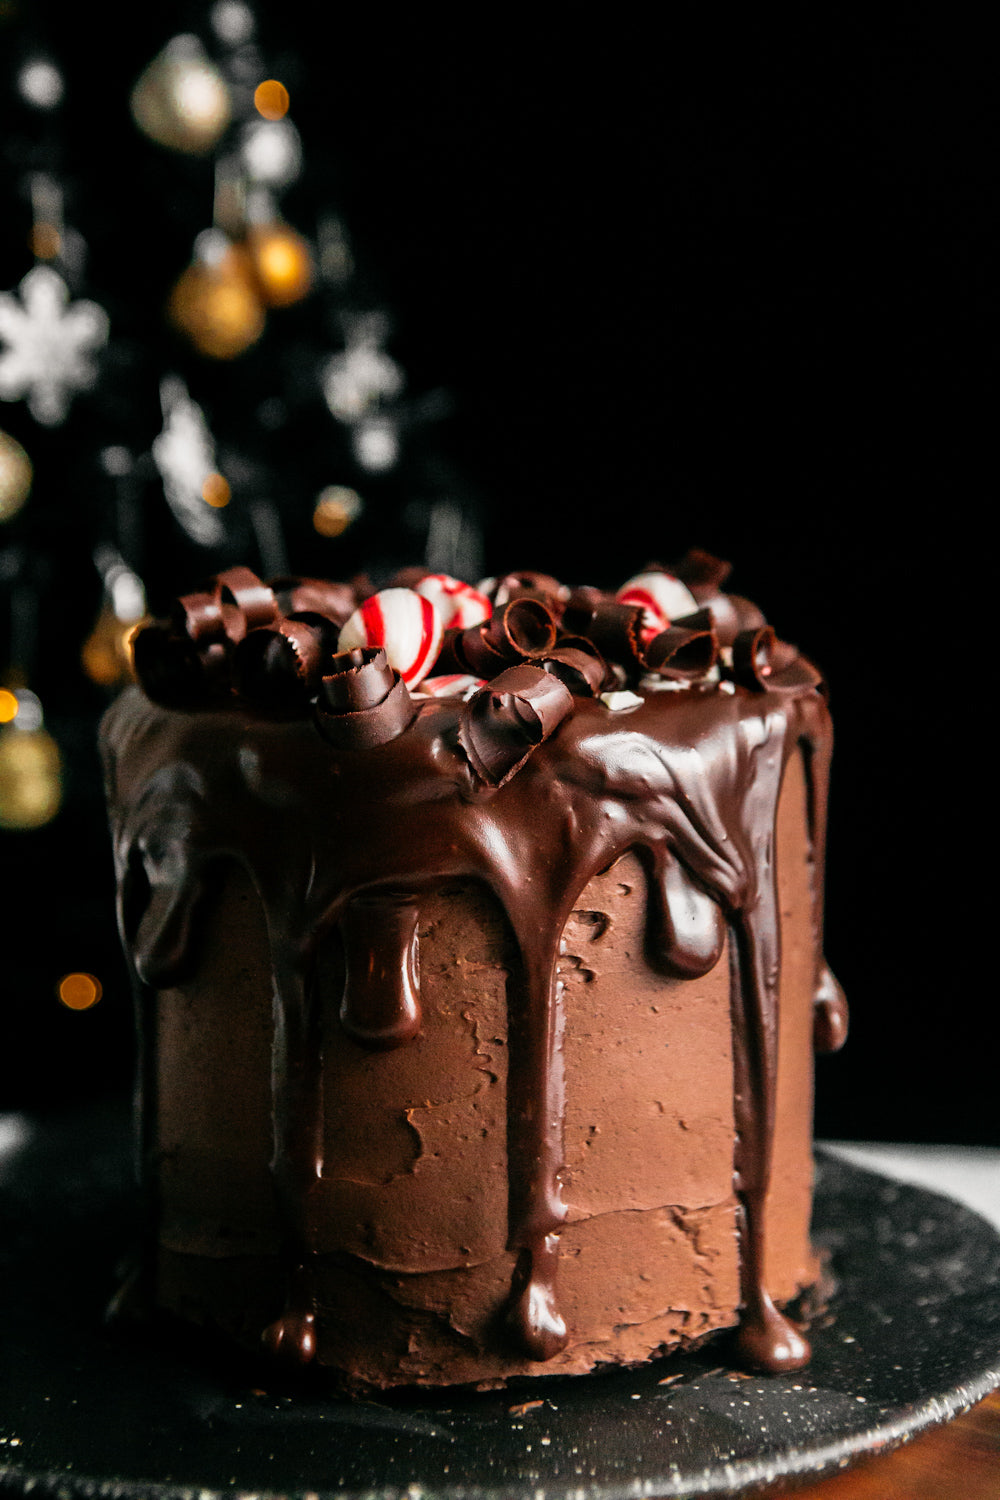 CHOCOLATE PEPPERMINT LAYER CAKE BY HEATHER’S HOME BAKERY